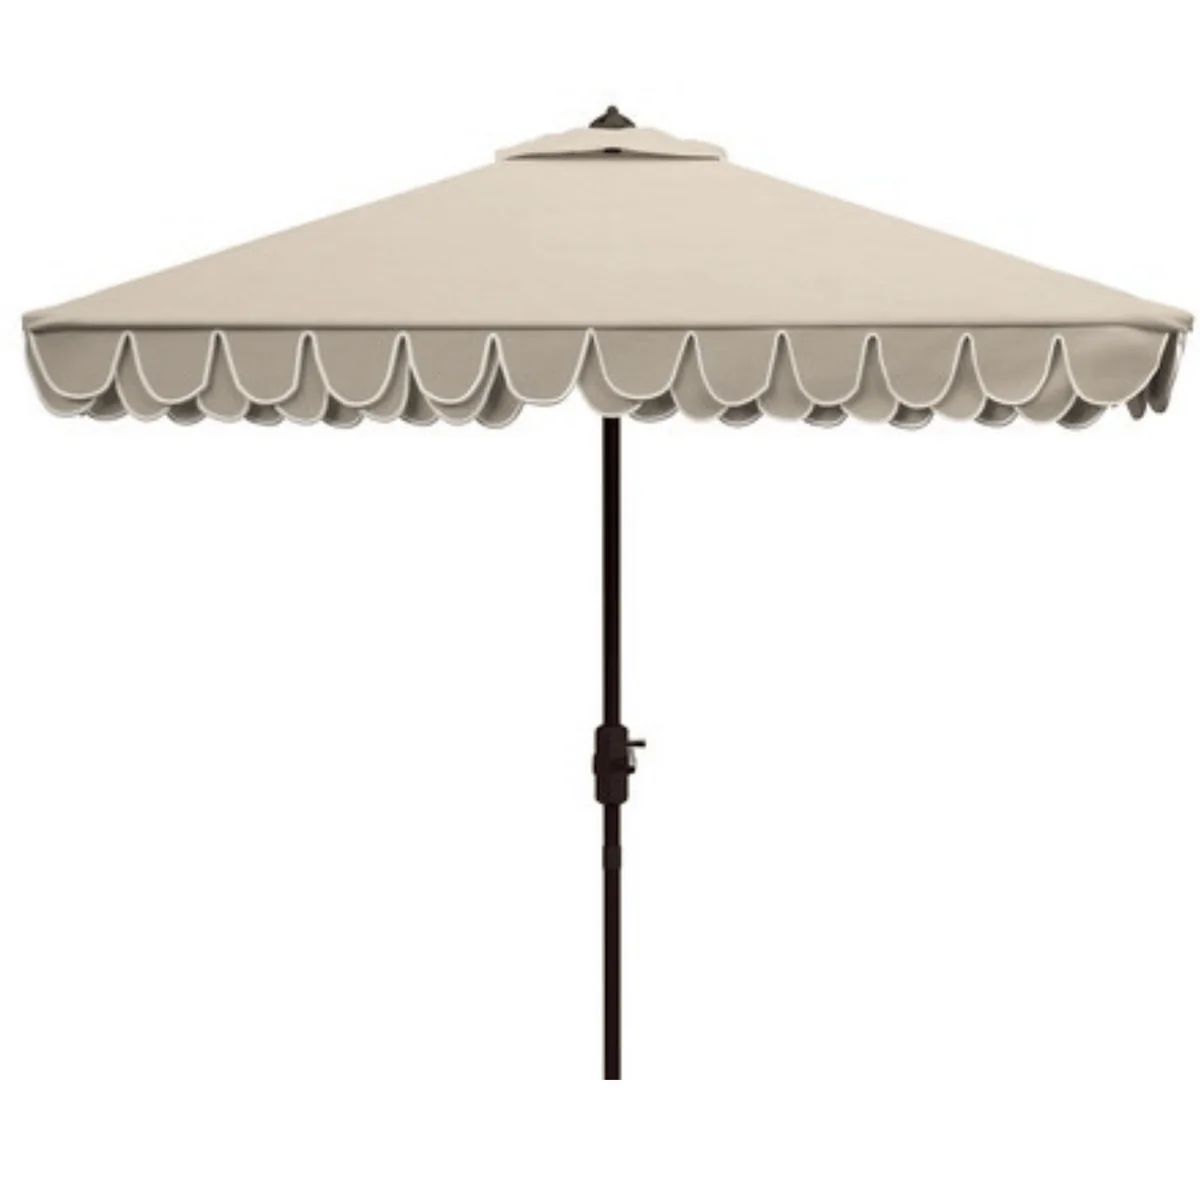 Elegant Valance 7.5 Ft Beige & White Square Umbrella | The Well Appointed House, LLC